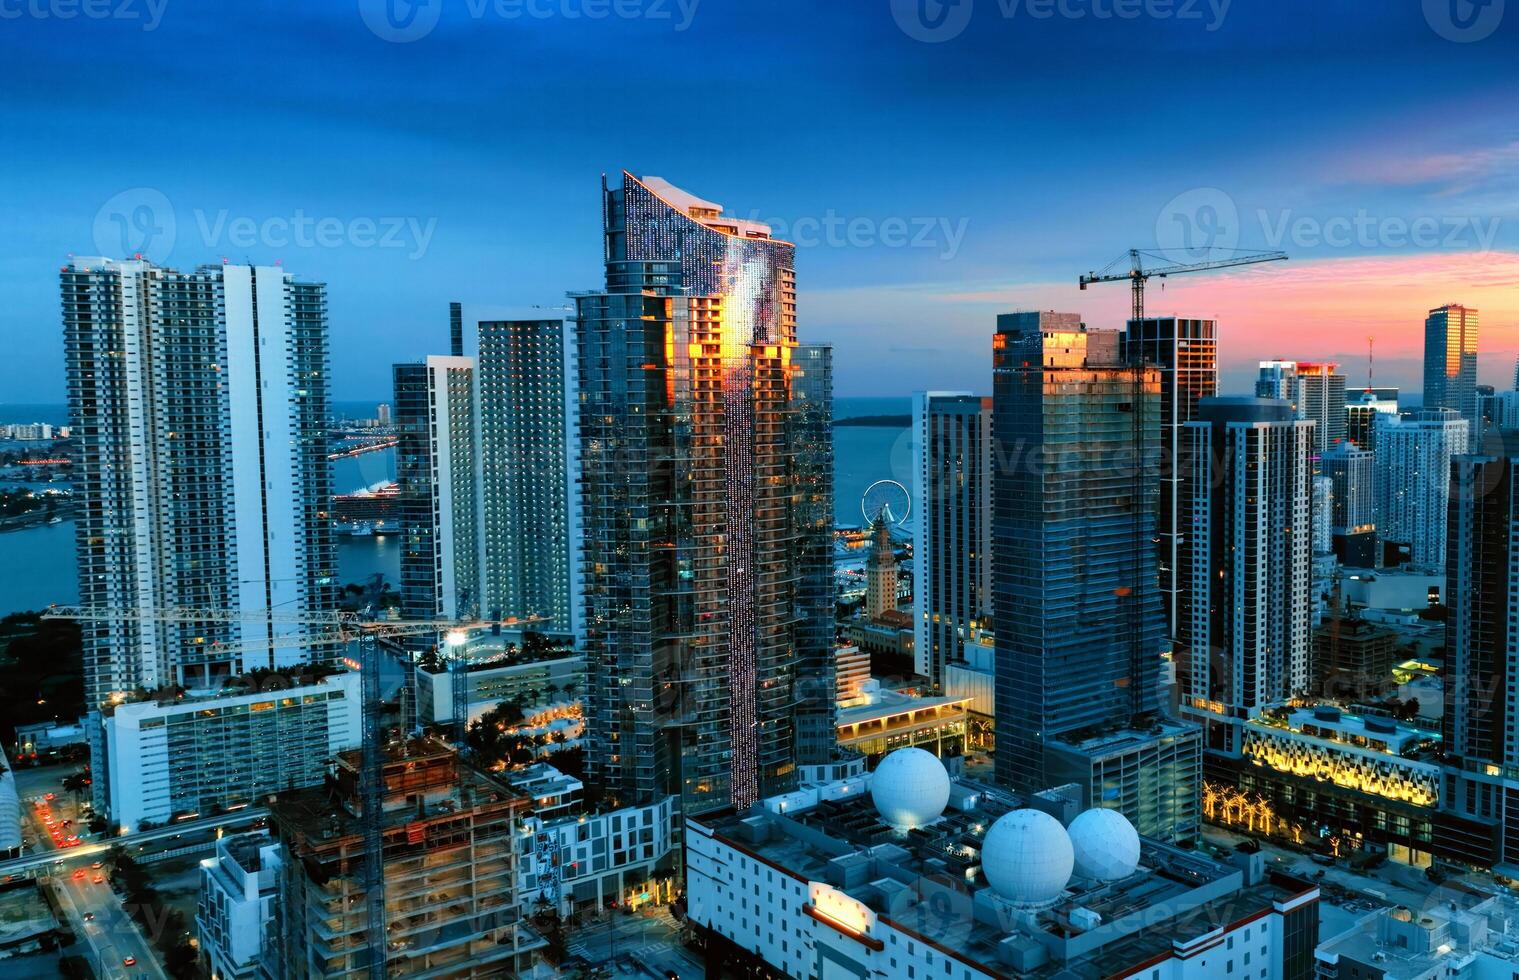 Aerial View of Miami City at Night From Building Top. Capture the breathtaking view of Miamis illuminated cityscape under the night sky from the top of a building. photo